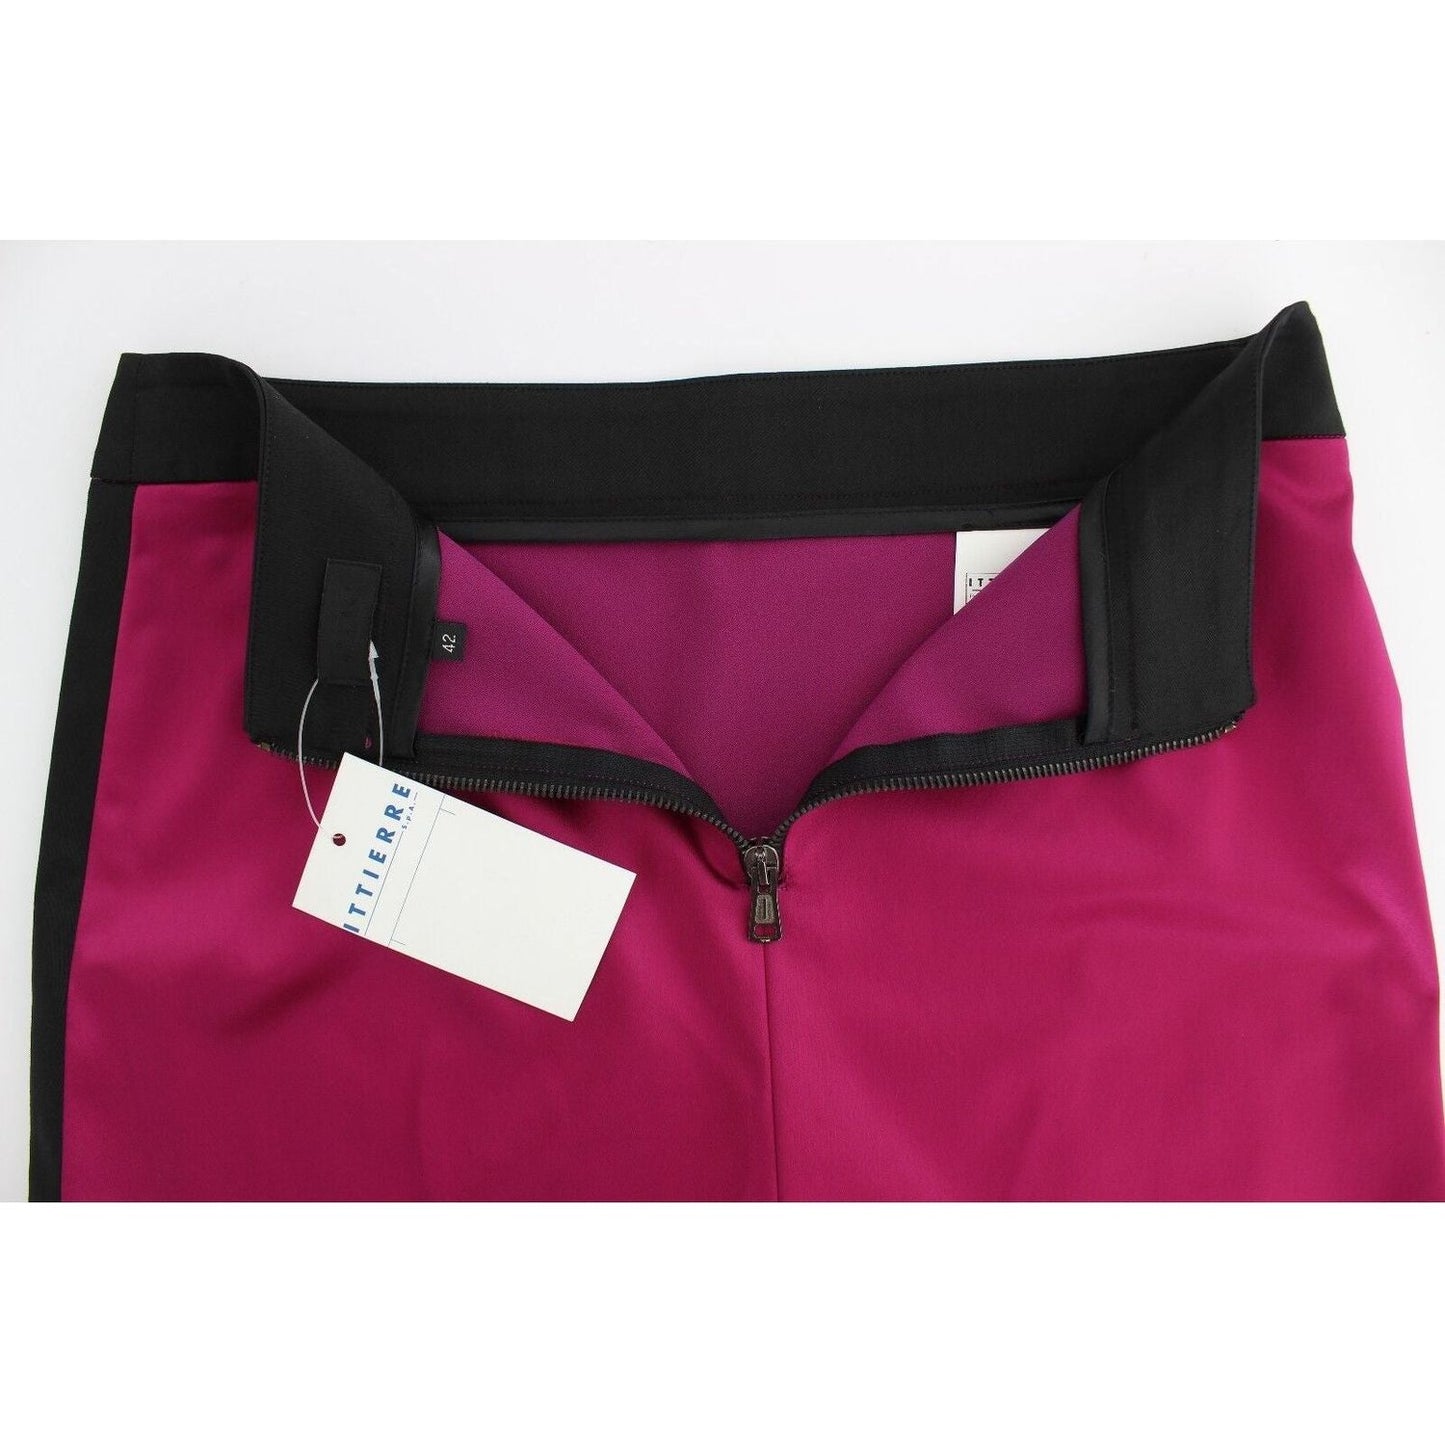 Dolce & Gabbana Elegant Pencil Skirt in Black and Pink pink-black-above-knees-cotton-stretch-skirt s-l1600-2023-01-25T131832.767-49f816be-d4f.jpg